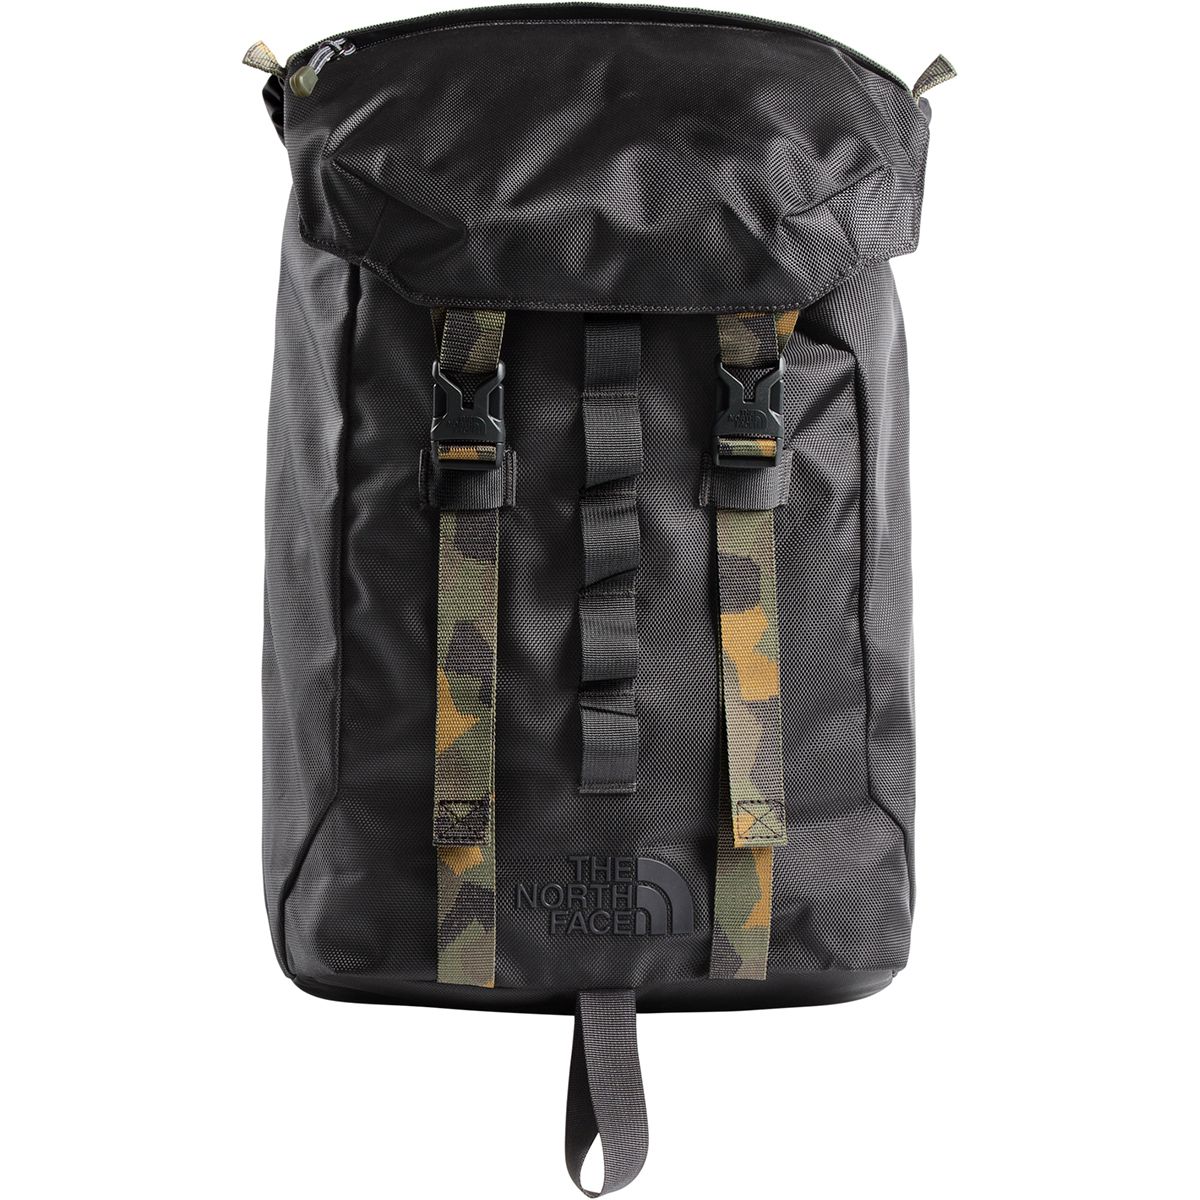 The North Face Lineage Ruck 23L Backpack - Hike & Camp